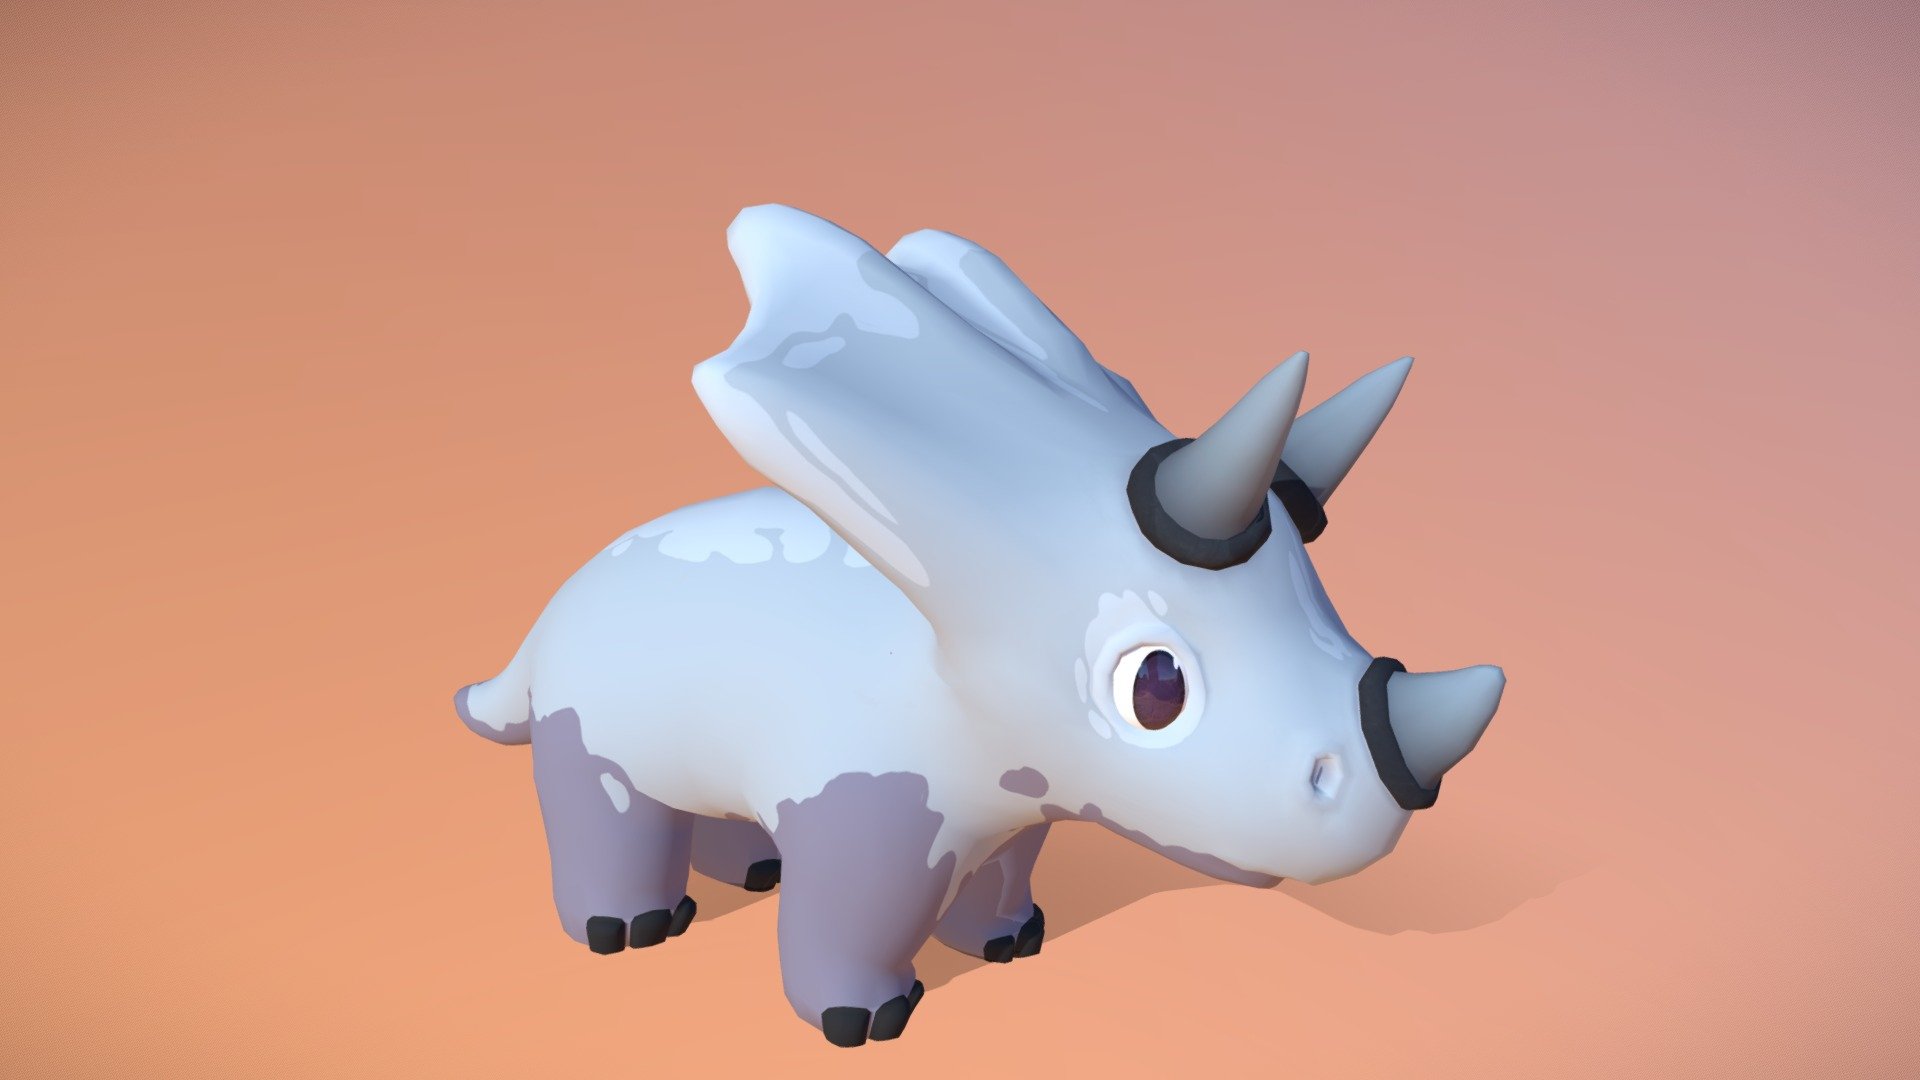 Animated baby triceratops with chonky little legs, inspired by the art in Paleo Pines by Italic Pig and Jim Henson's puppet &lsquo;26' in Dinotopia 3d model